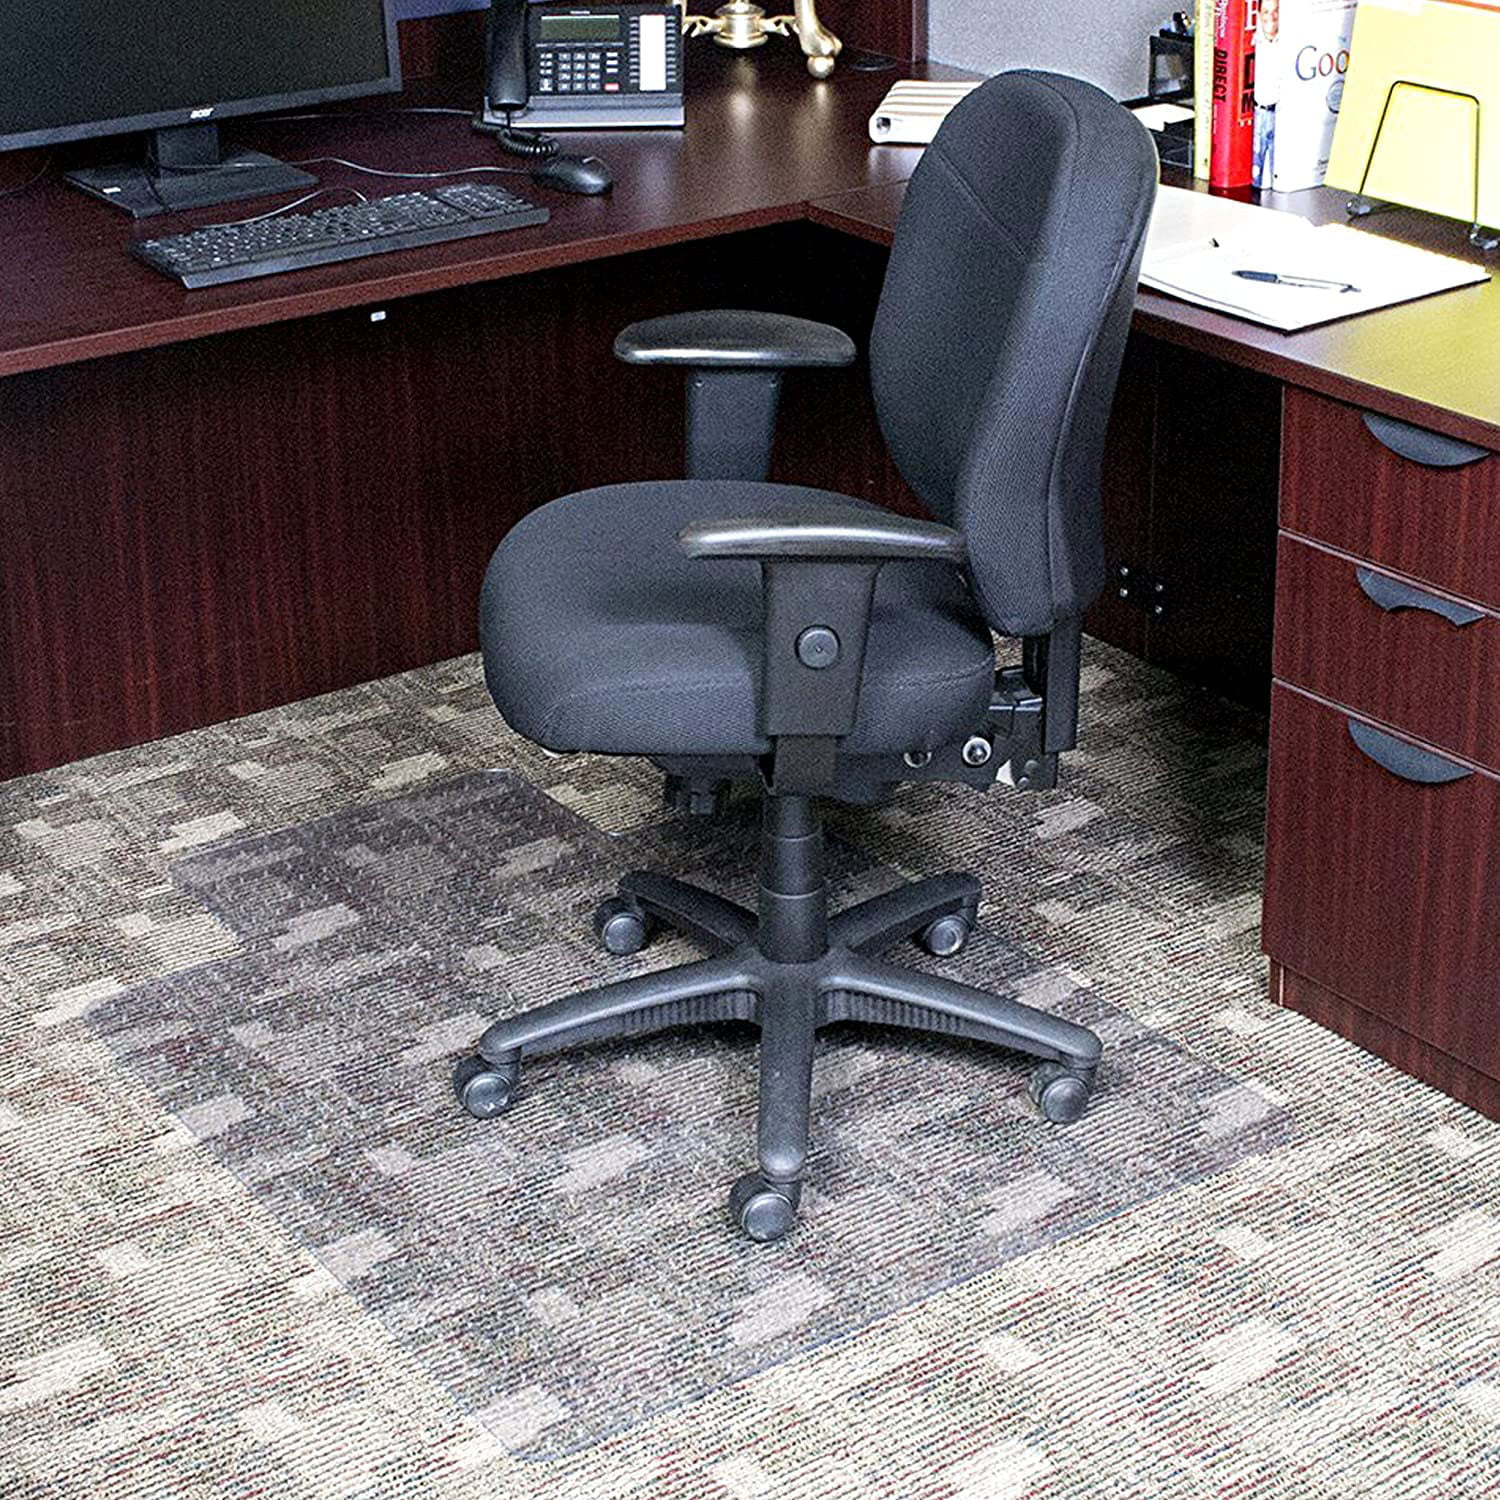 Dimex 36 x 48 Inch Plastic Office Chair Mat for Low Pile